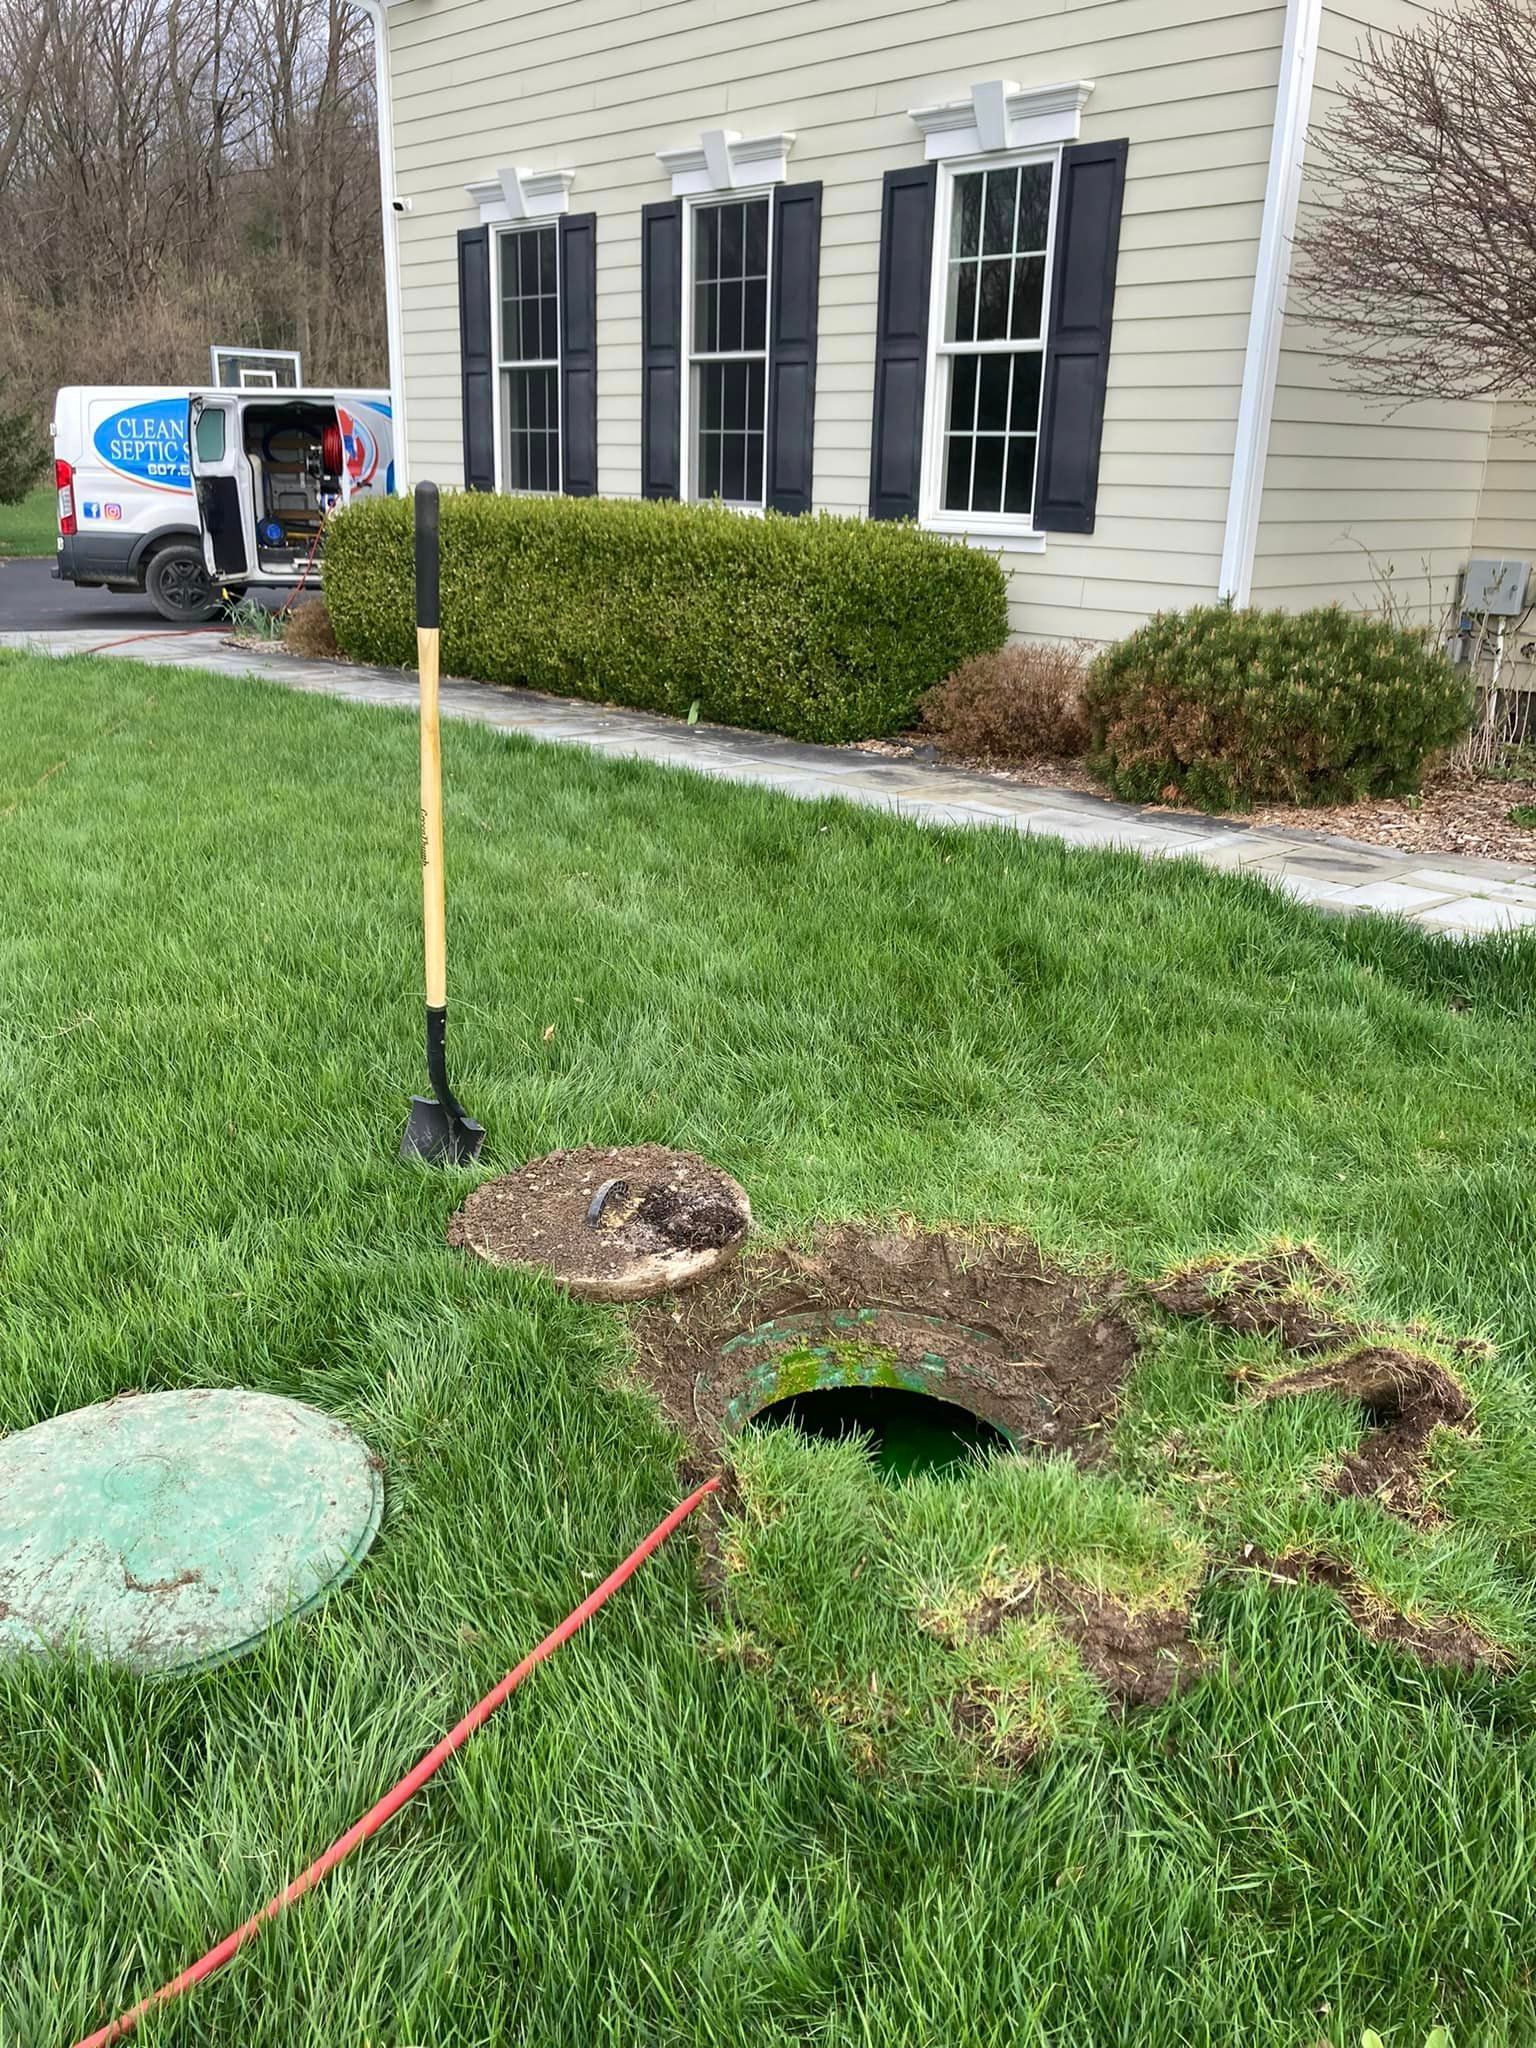 Septic system cleanout | septic pumping in Ithaca, NY